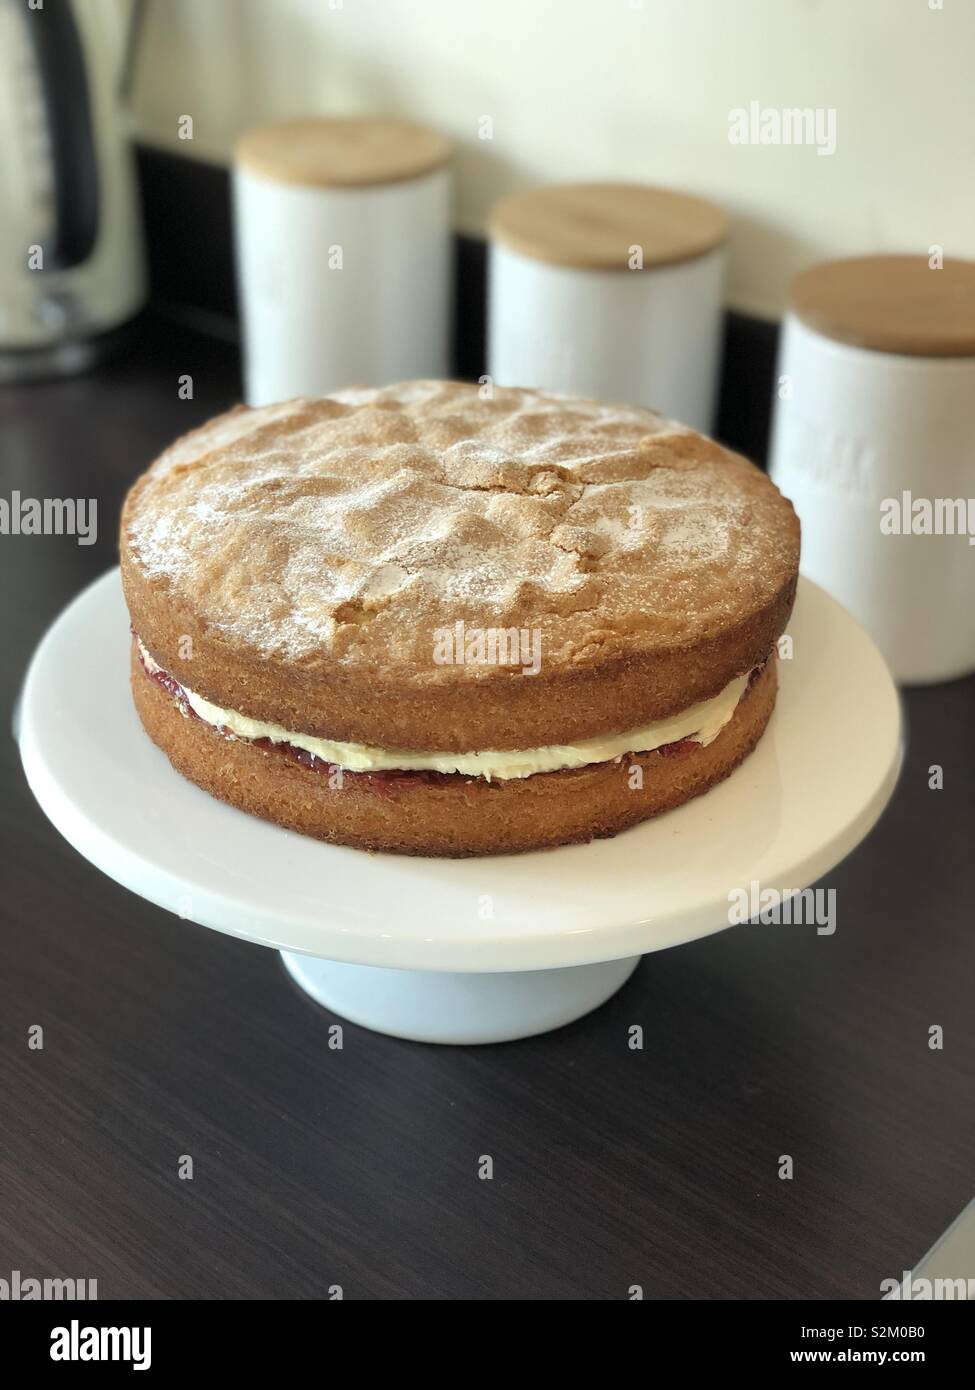 Victoria sponge cake on stand home baked Stock Photo